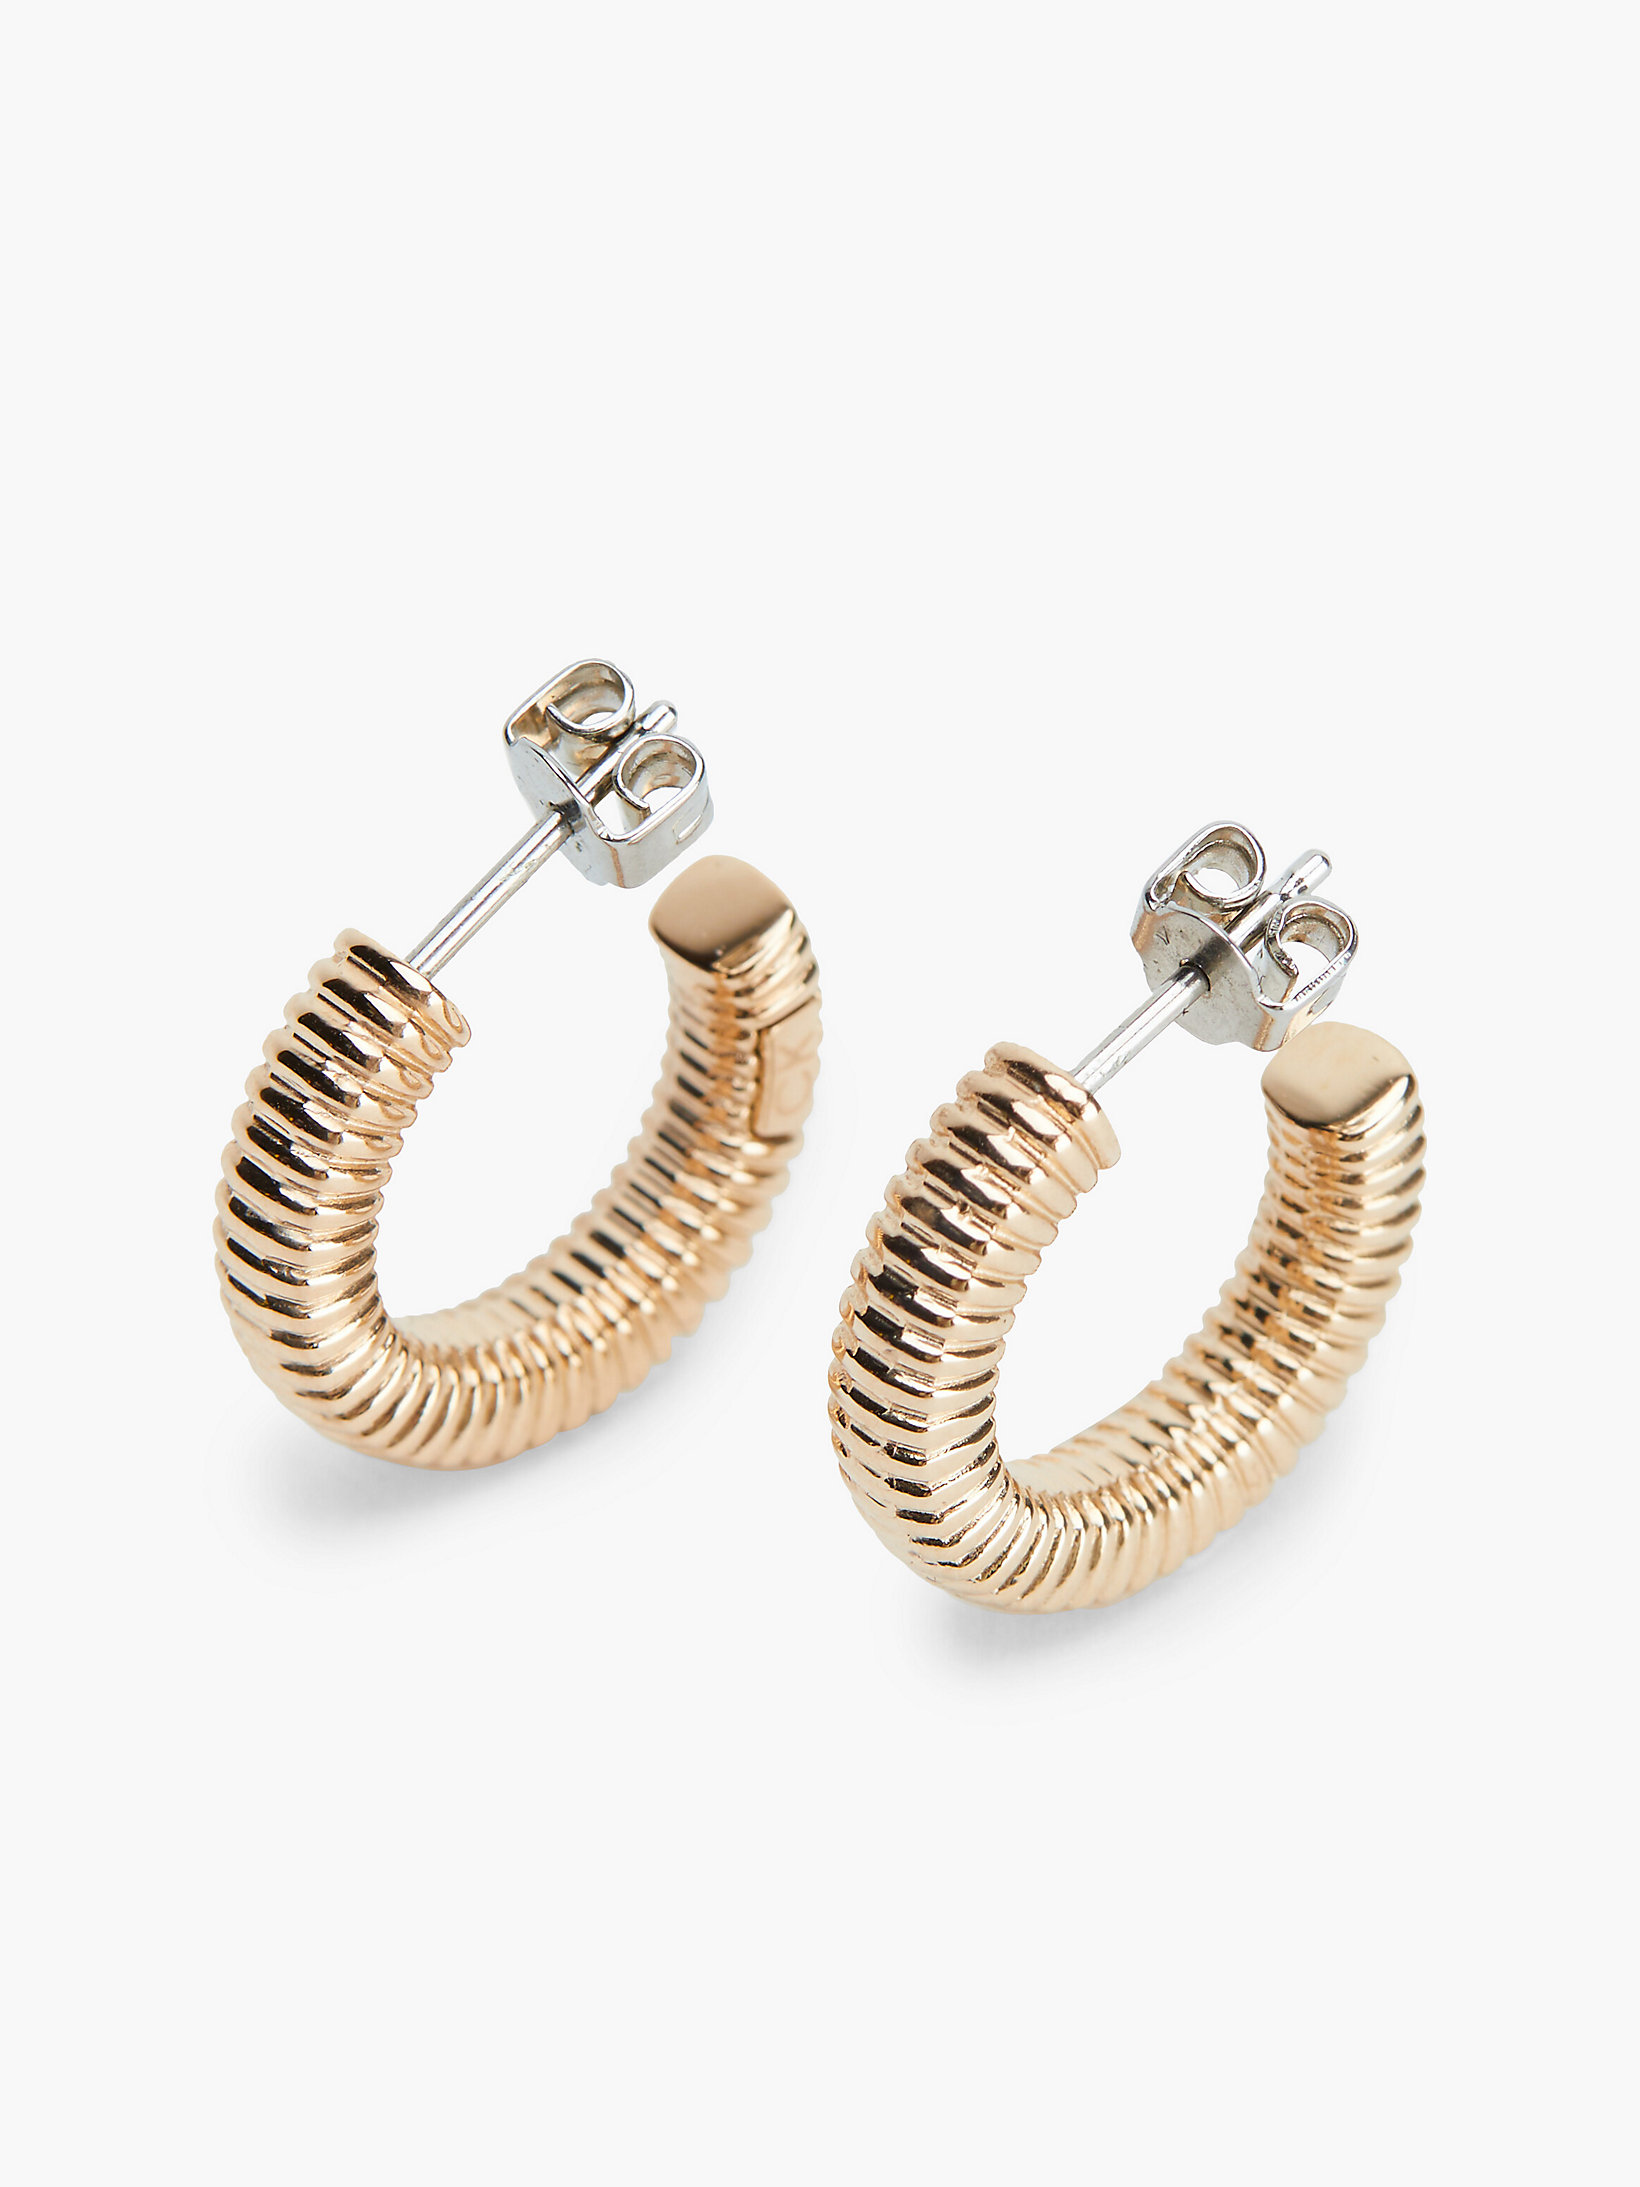 Carnation Gold Earrings - Playful Repetition undefined women Calvin Klein